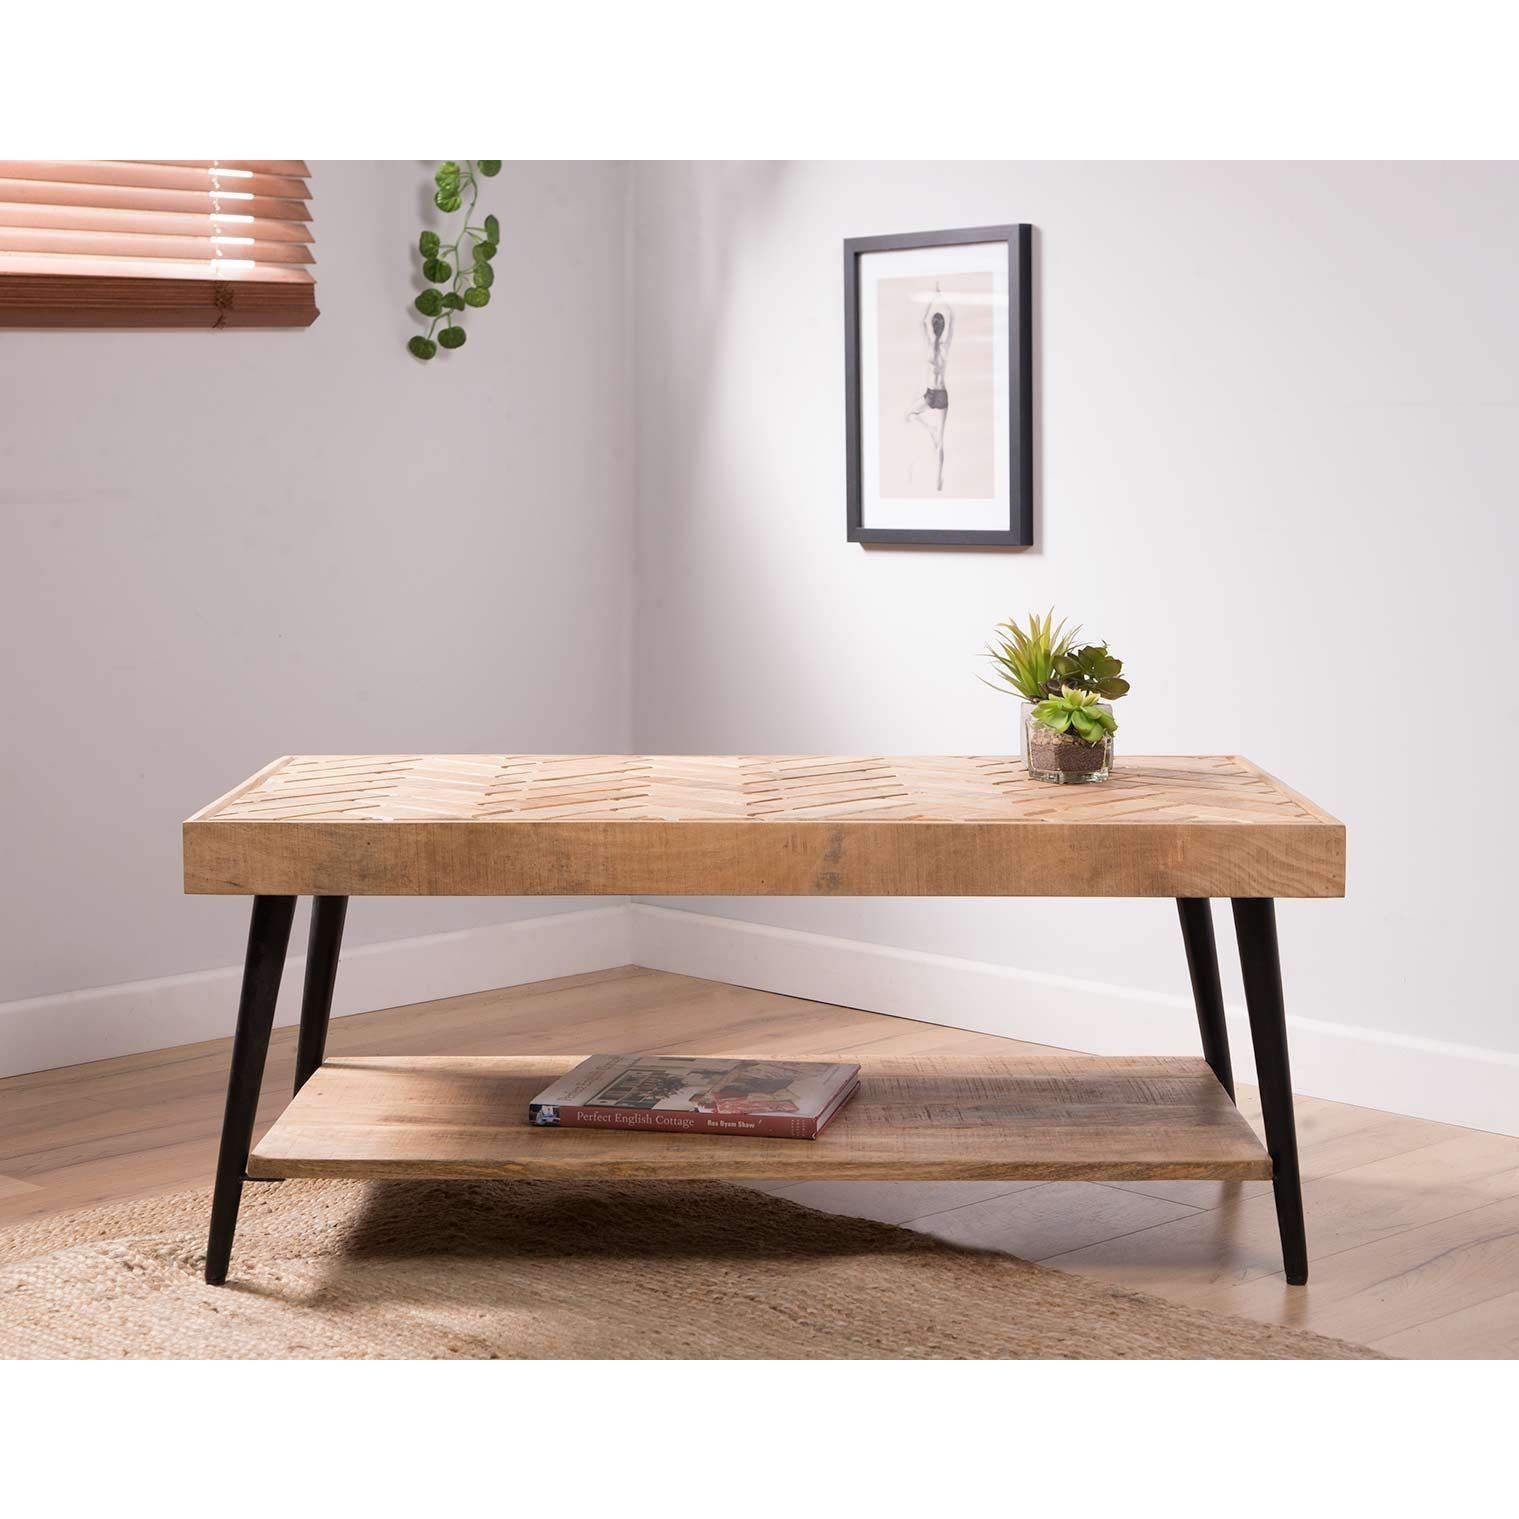 Distressed Solid Mango Wood Patterned 3d Coffee Table With Shelf | Casa  Bella Furniture Uk Throughout Mango Wood Coffee Tables (View 11 of 20)